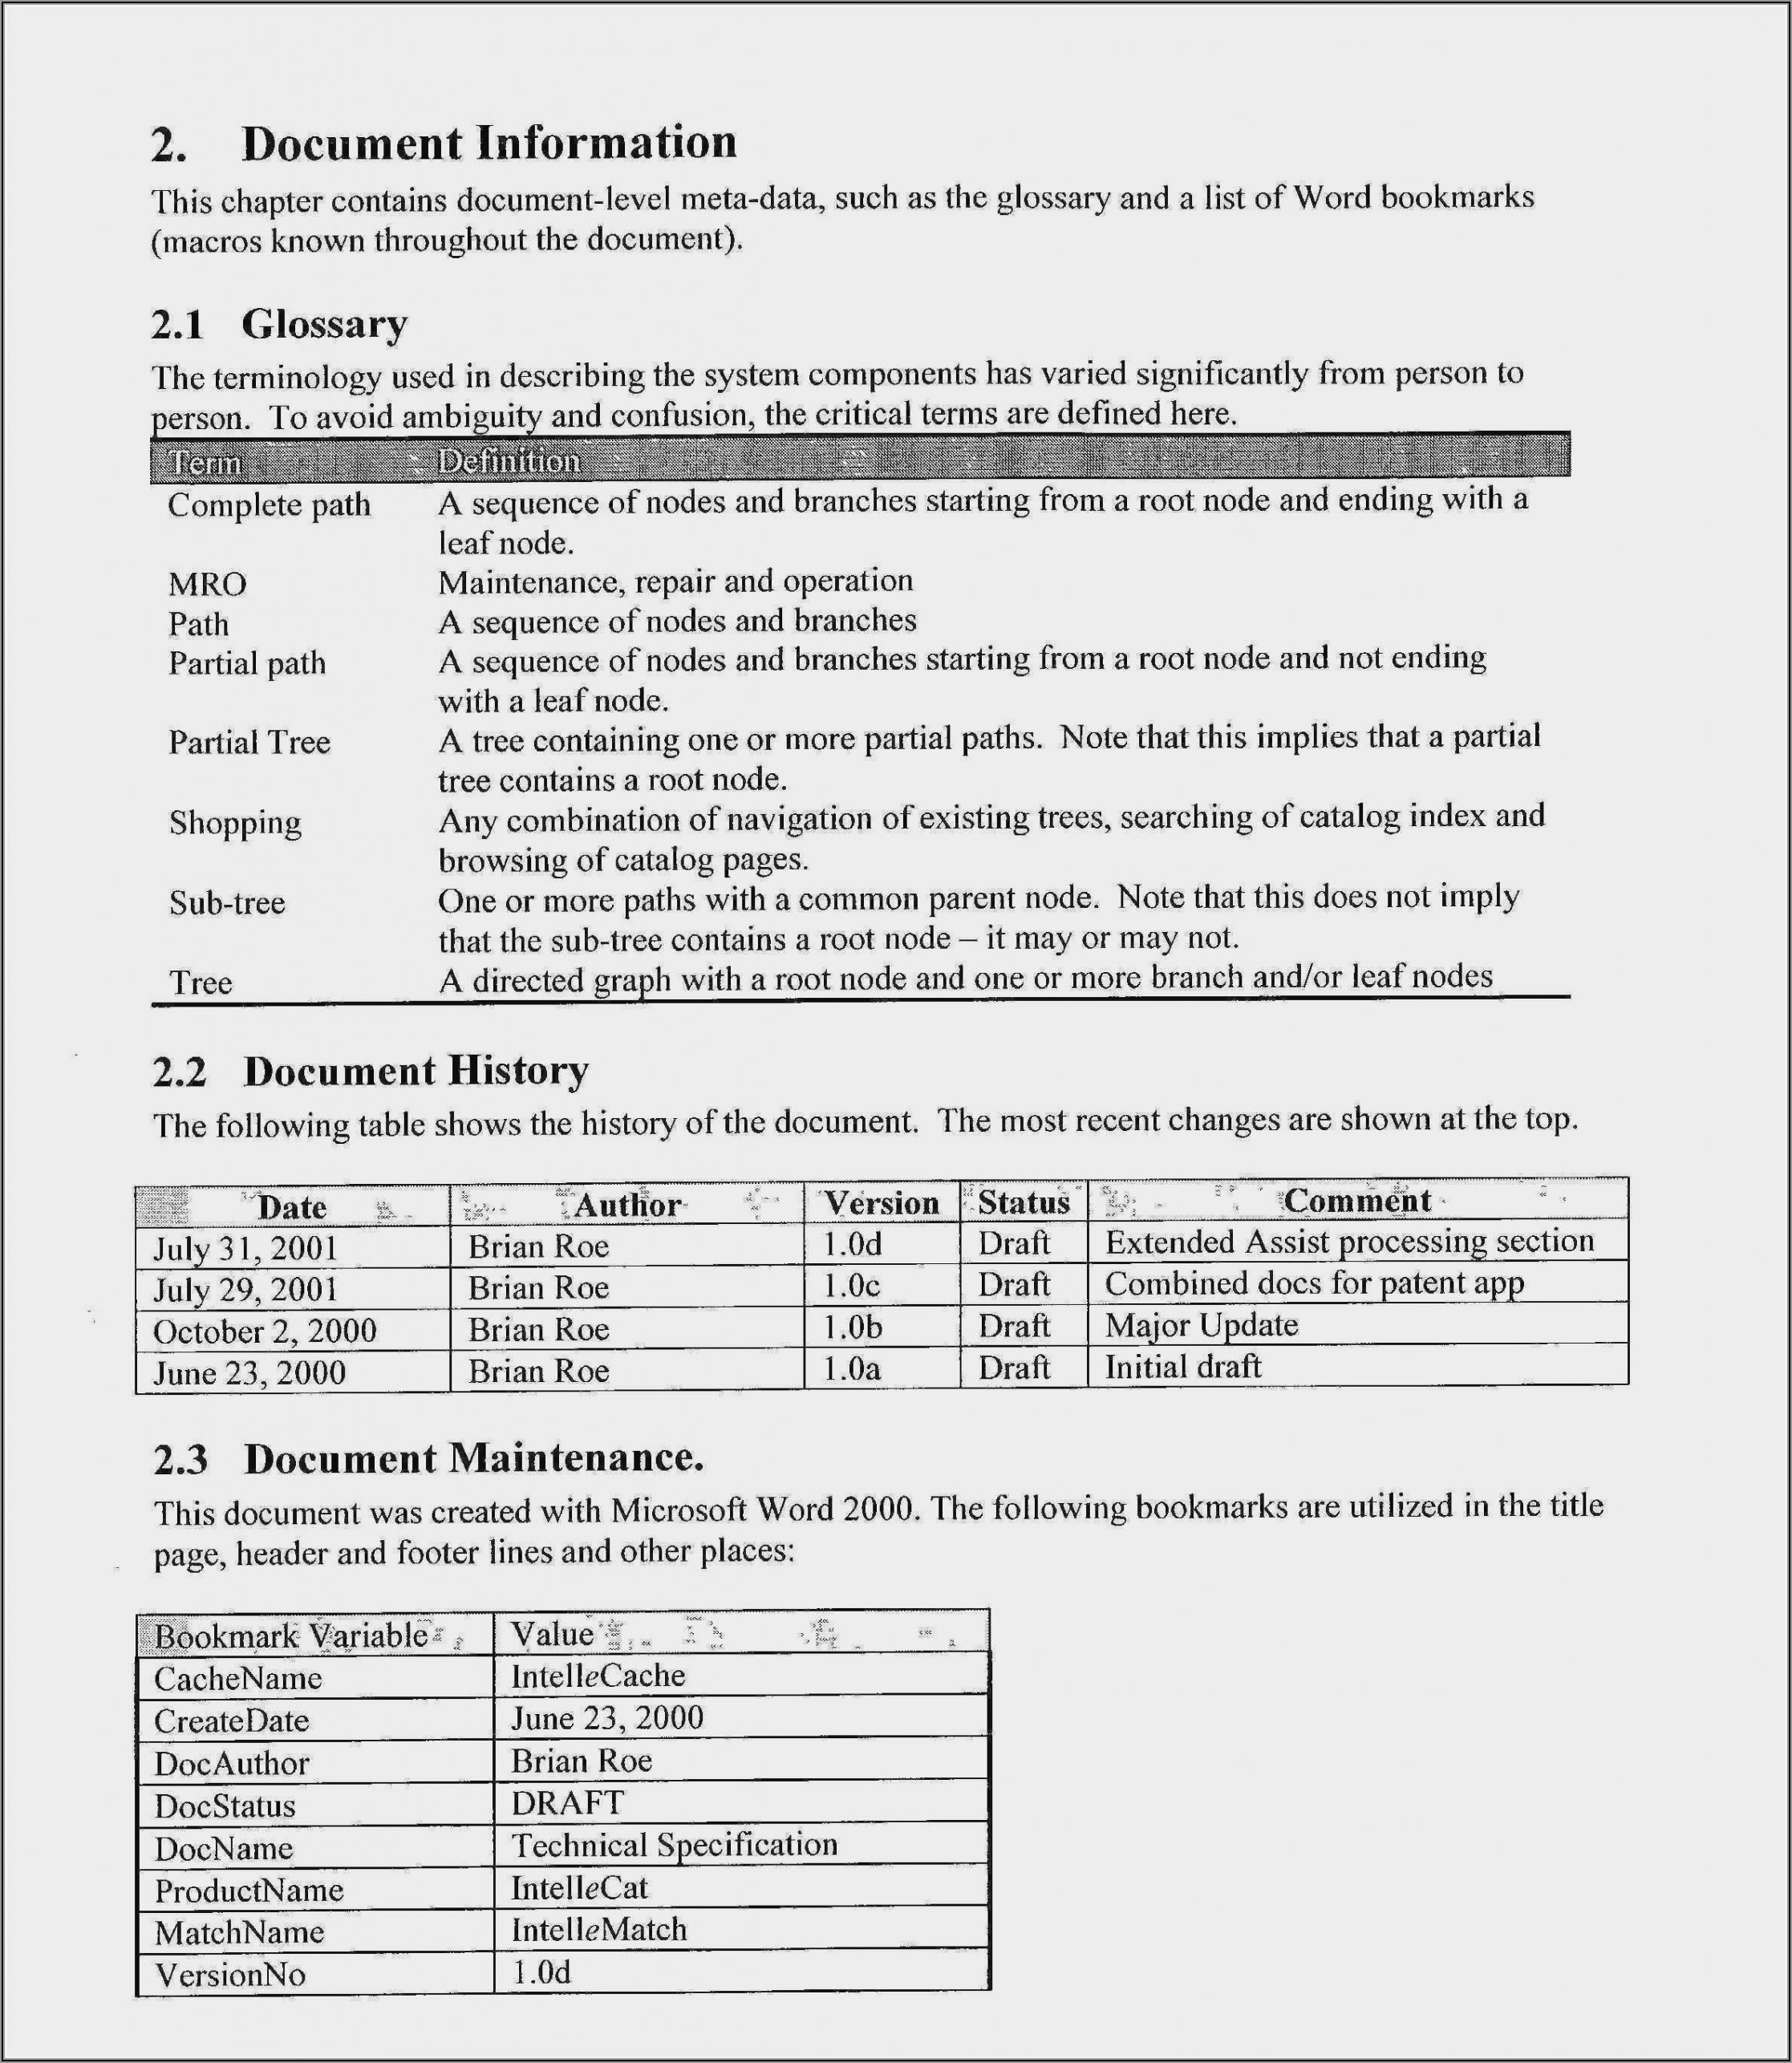 Construction Project Manager Resume Template